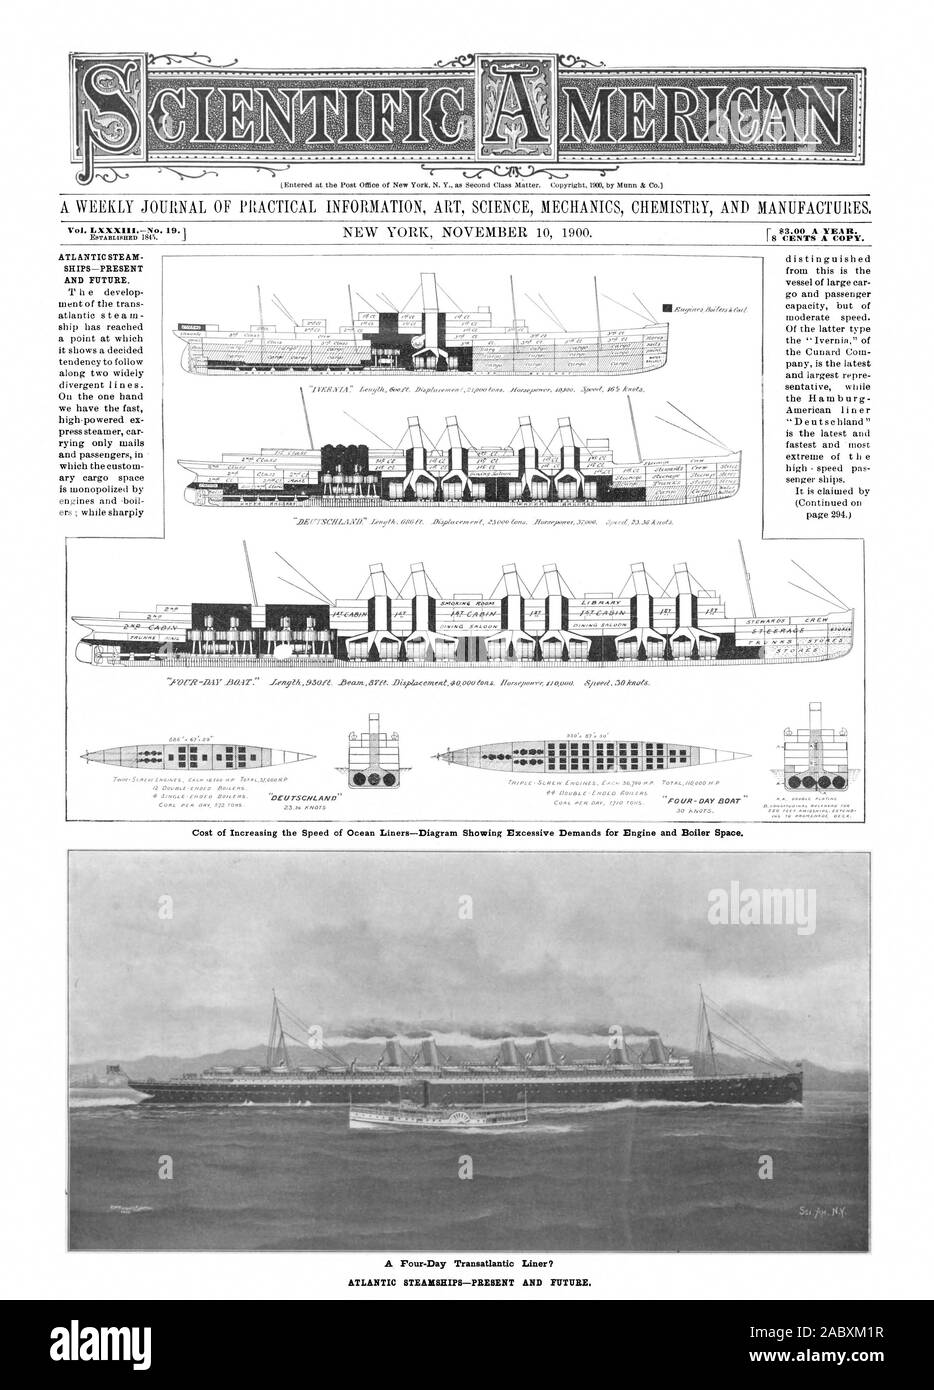 I 8 CENTS A COPY. lEntered at the Post Office of New York N. Y. as Second Class Matter. Copyright 1900 by Mann & Co. ATLANTIC STEAM SHIPS—PRESENT AND FUTURE. c ATLANTIC STEAMSHIPS—PRESENT AND FUTURE., scientific american, 1900-11-10 Stock Photo